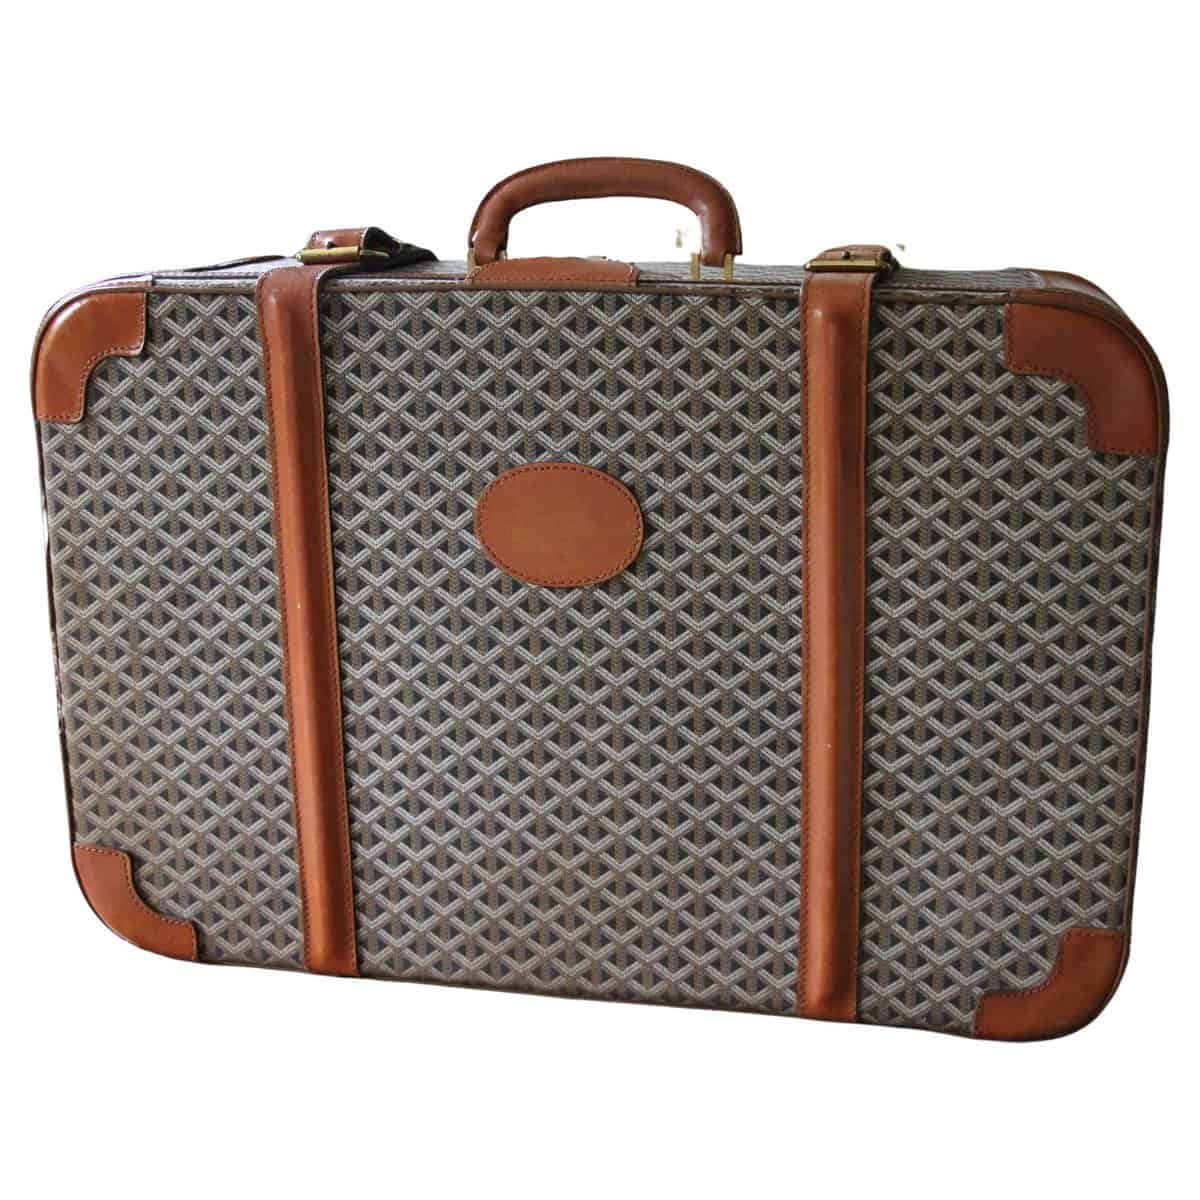 Rolling suitcase in goyardine and black leather, address…